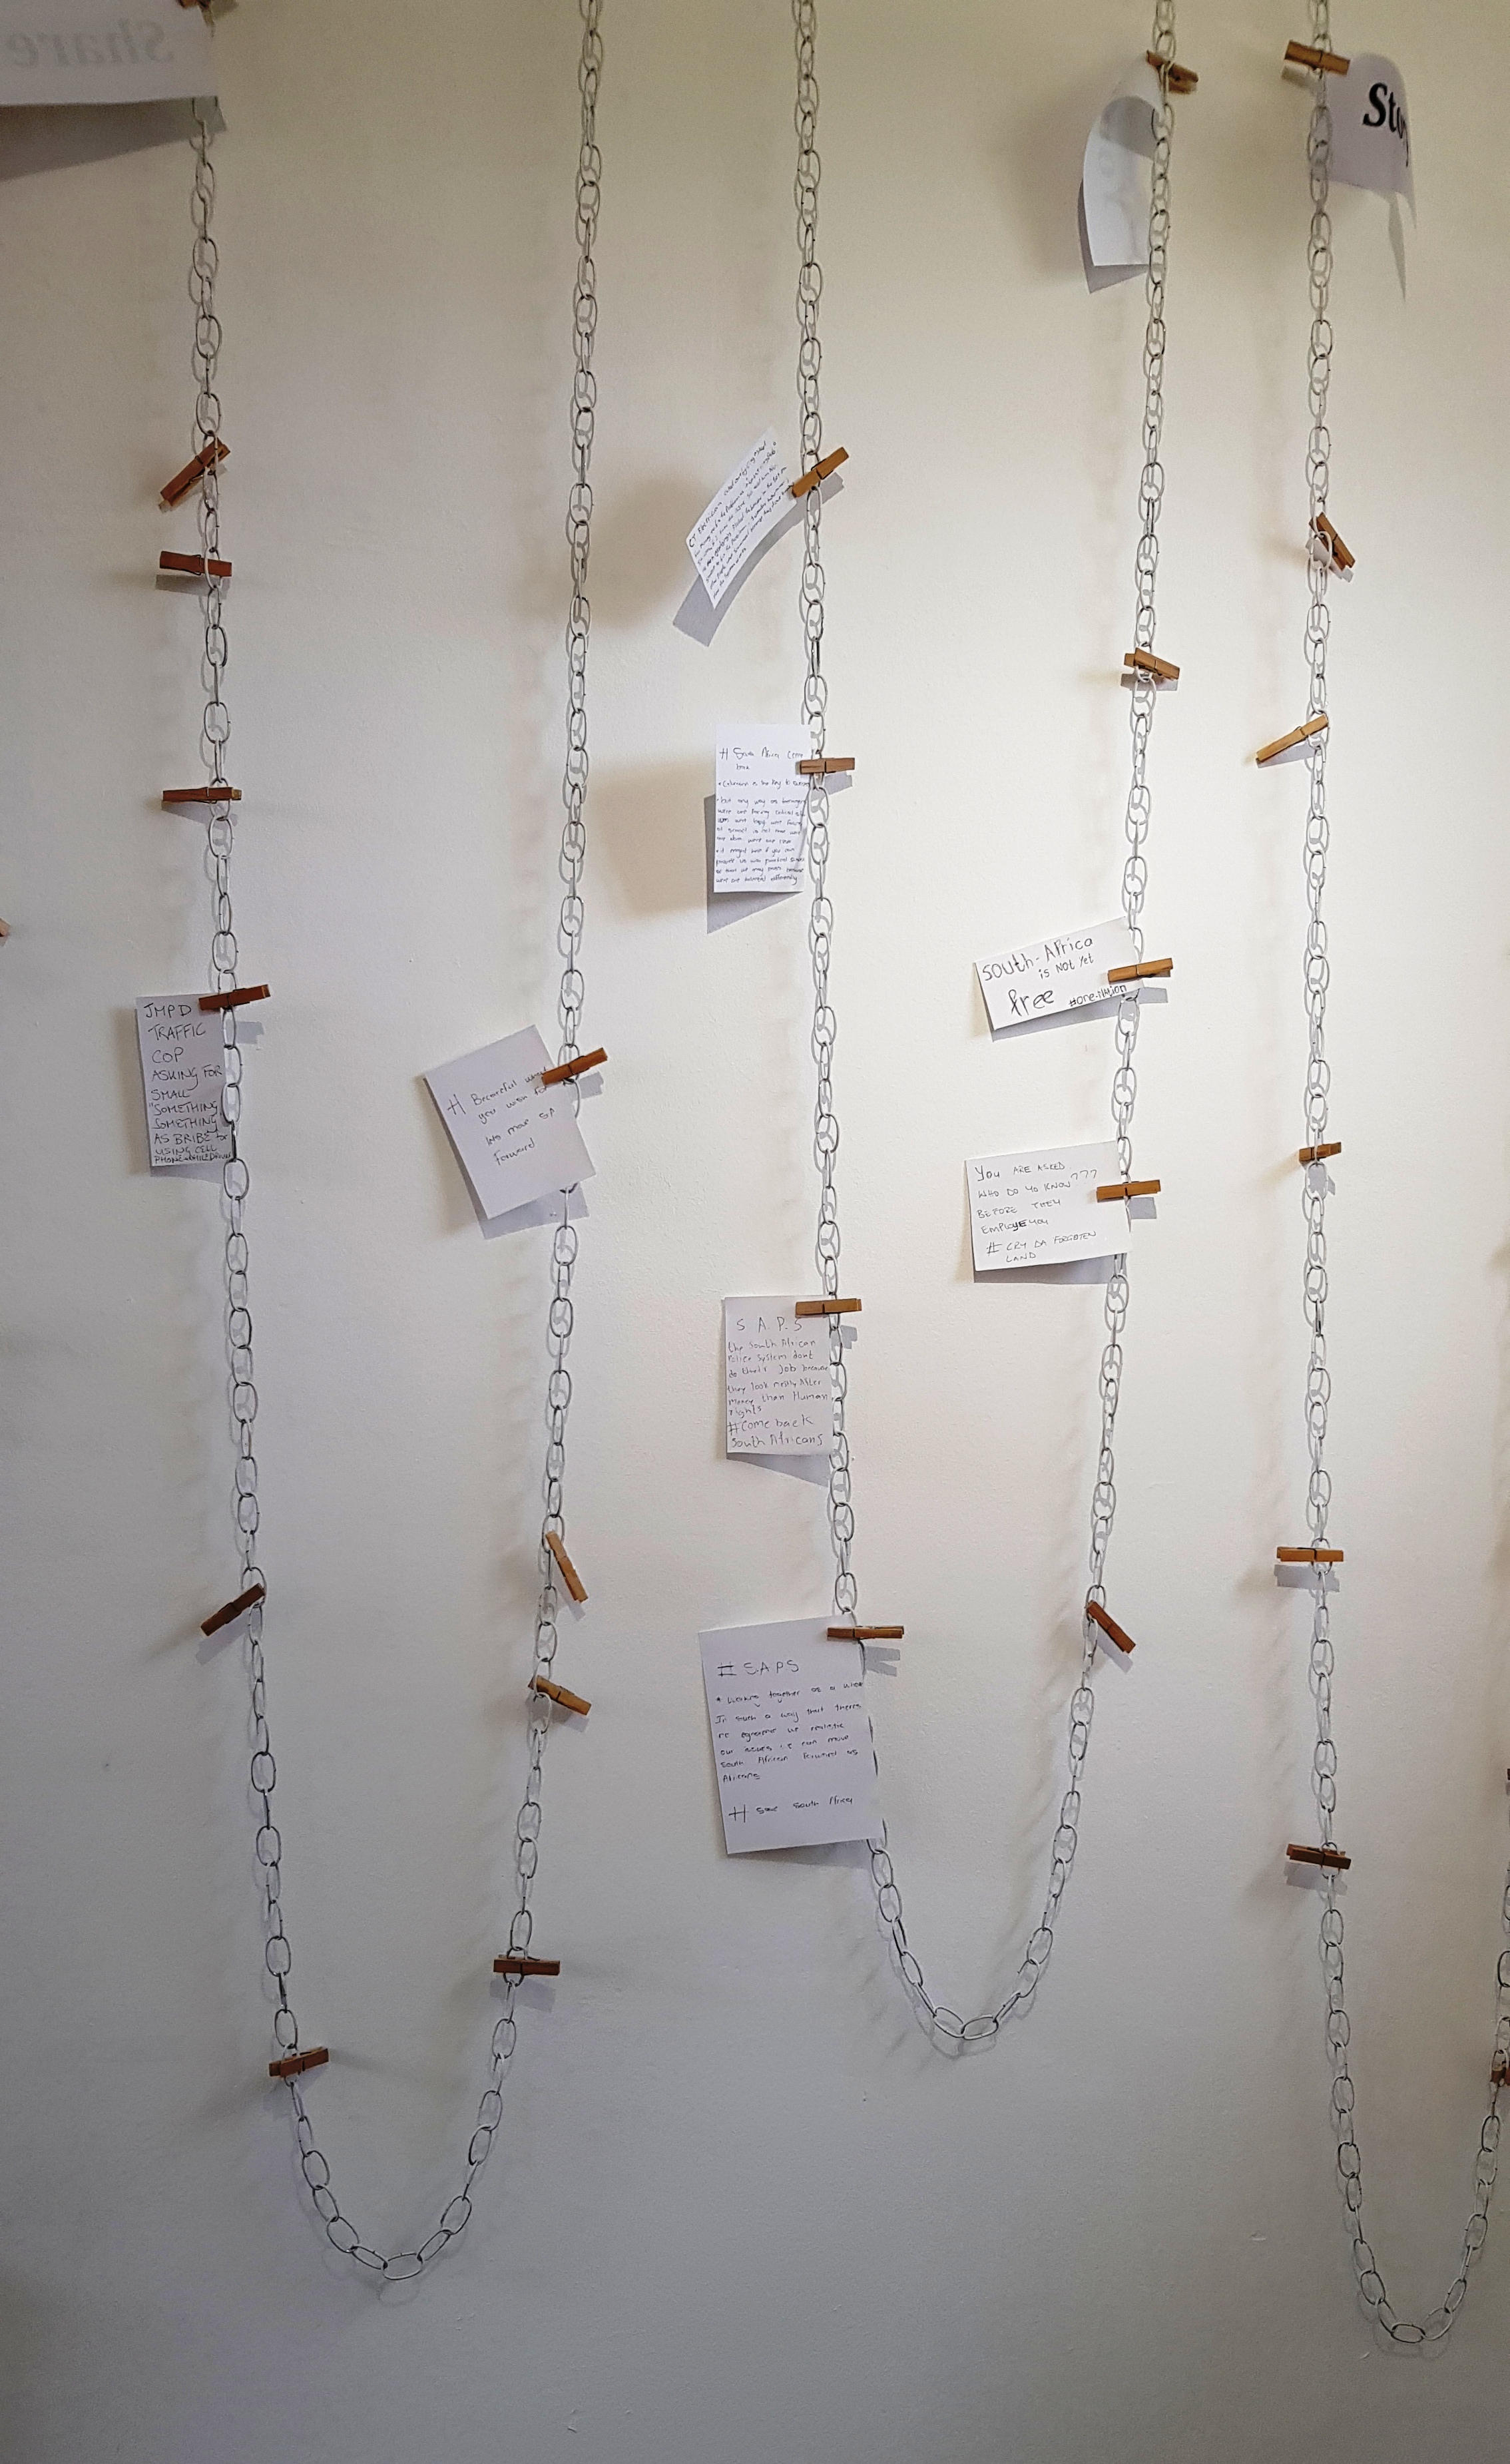 Interactive wall  with pegs holding up pieces of paper where stories are contributed